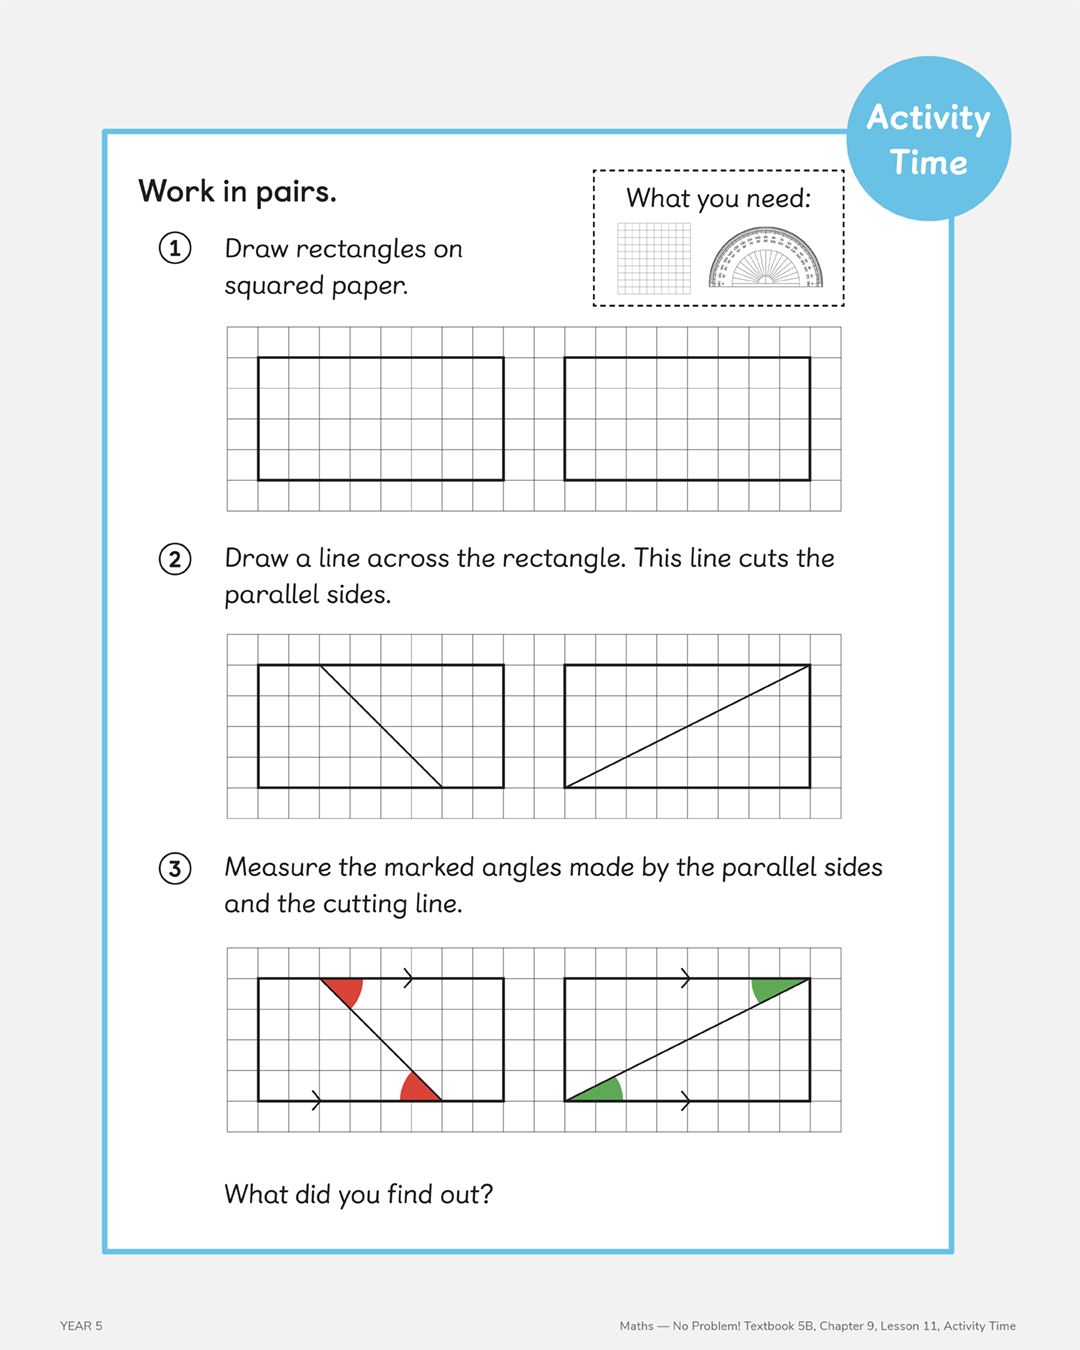 year 5 textbook 5b chapter 9 lesson 11 activity time